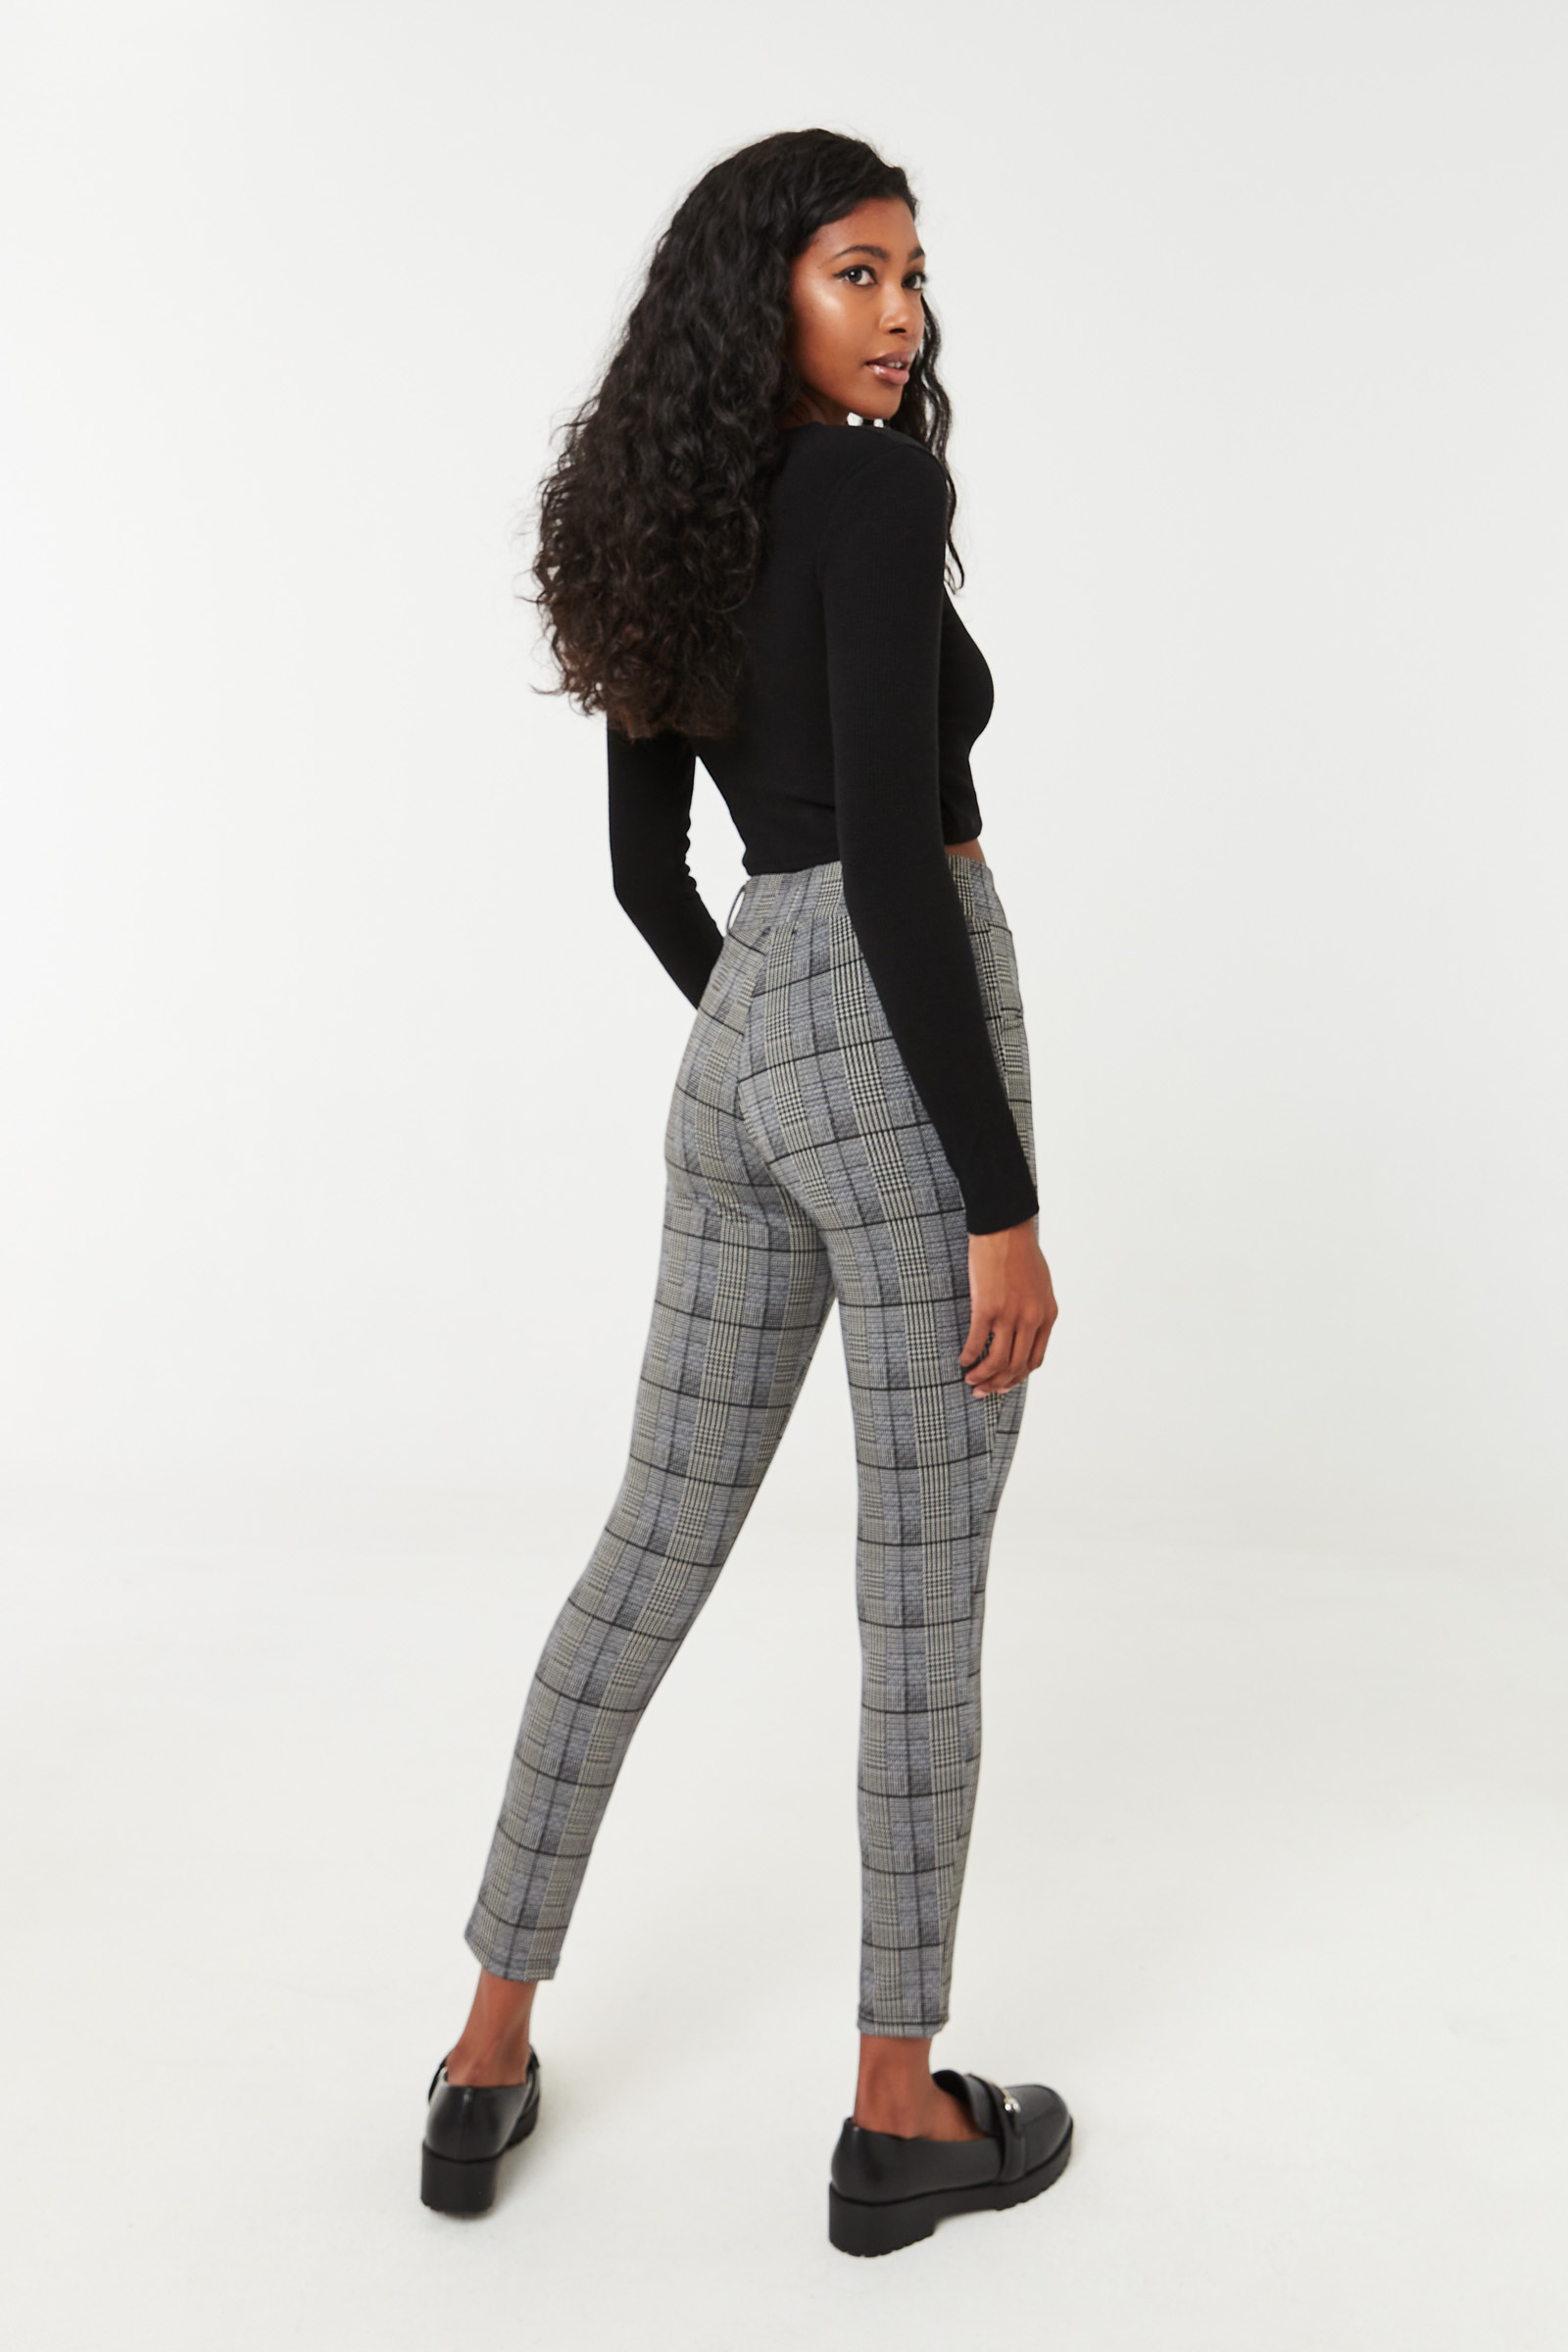 Glen Plaid Leggings with Buttons